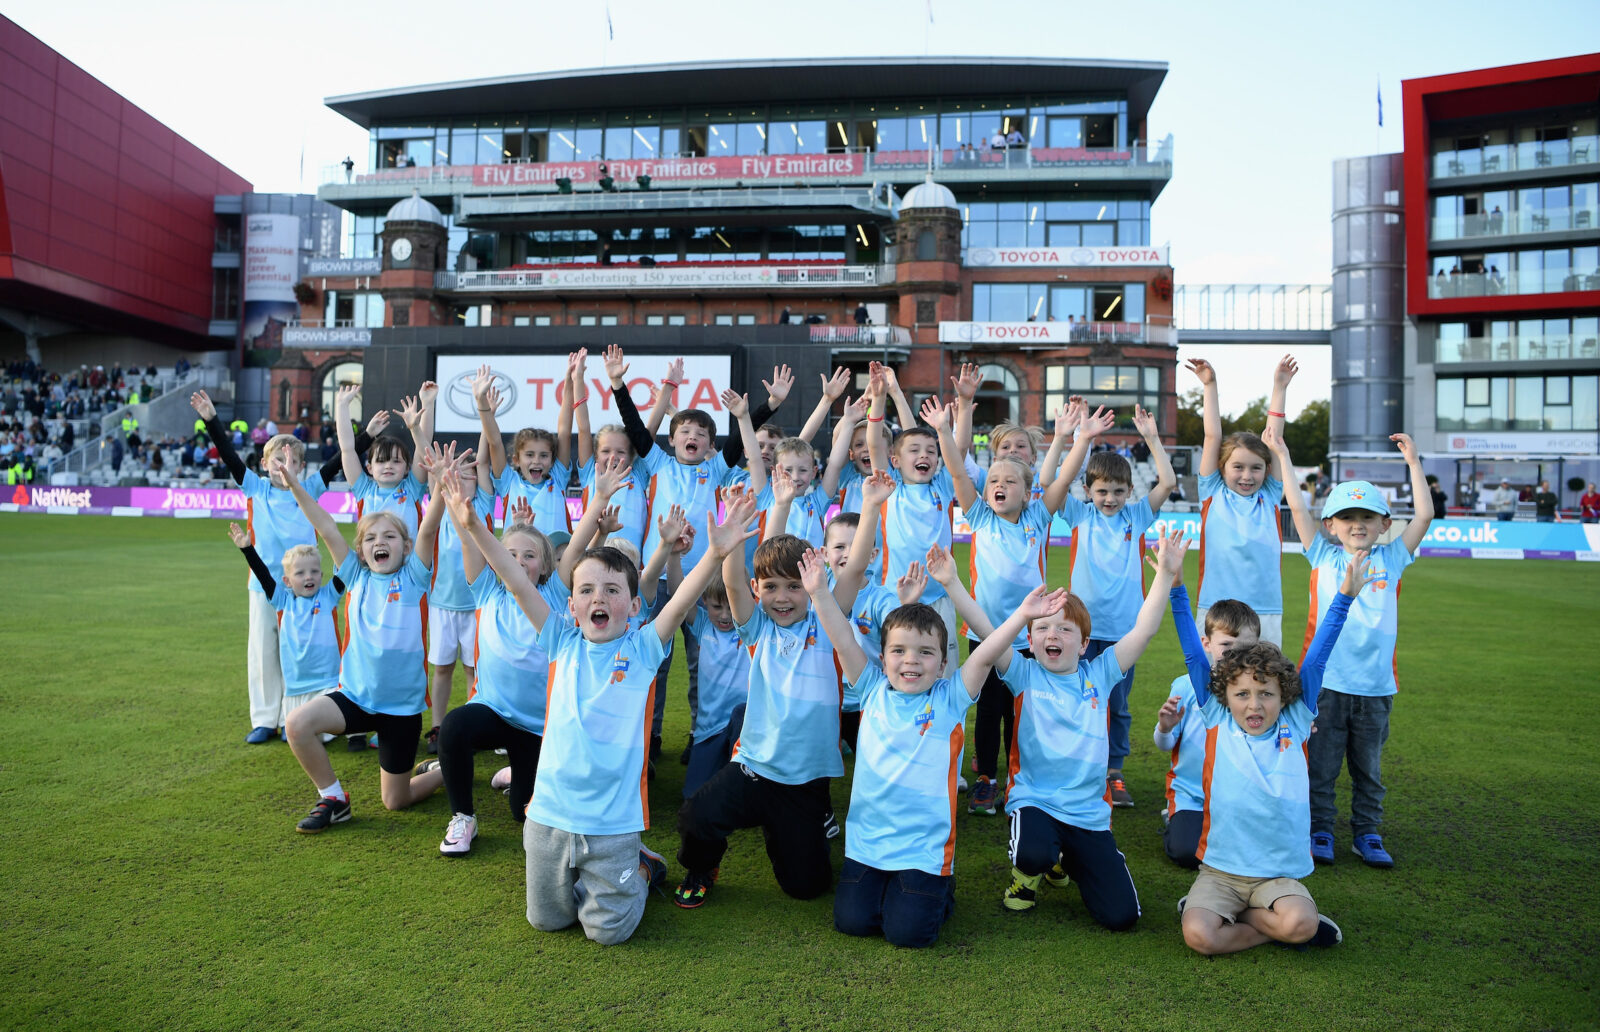 all stars and dynamos cricket for kids greater manchester